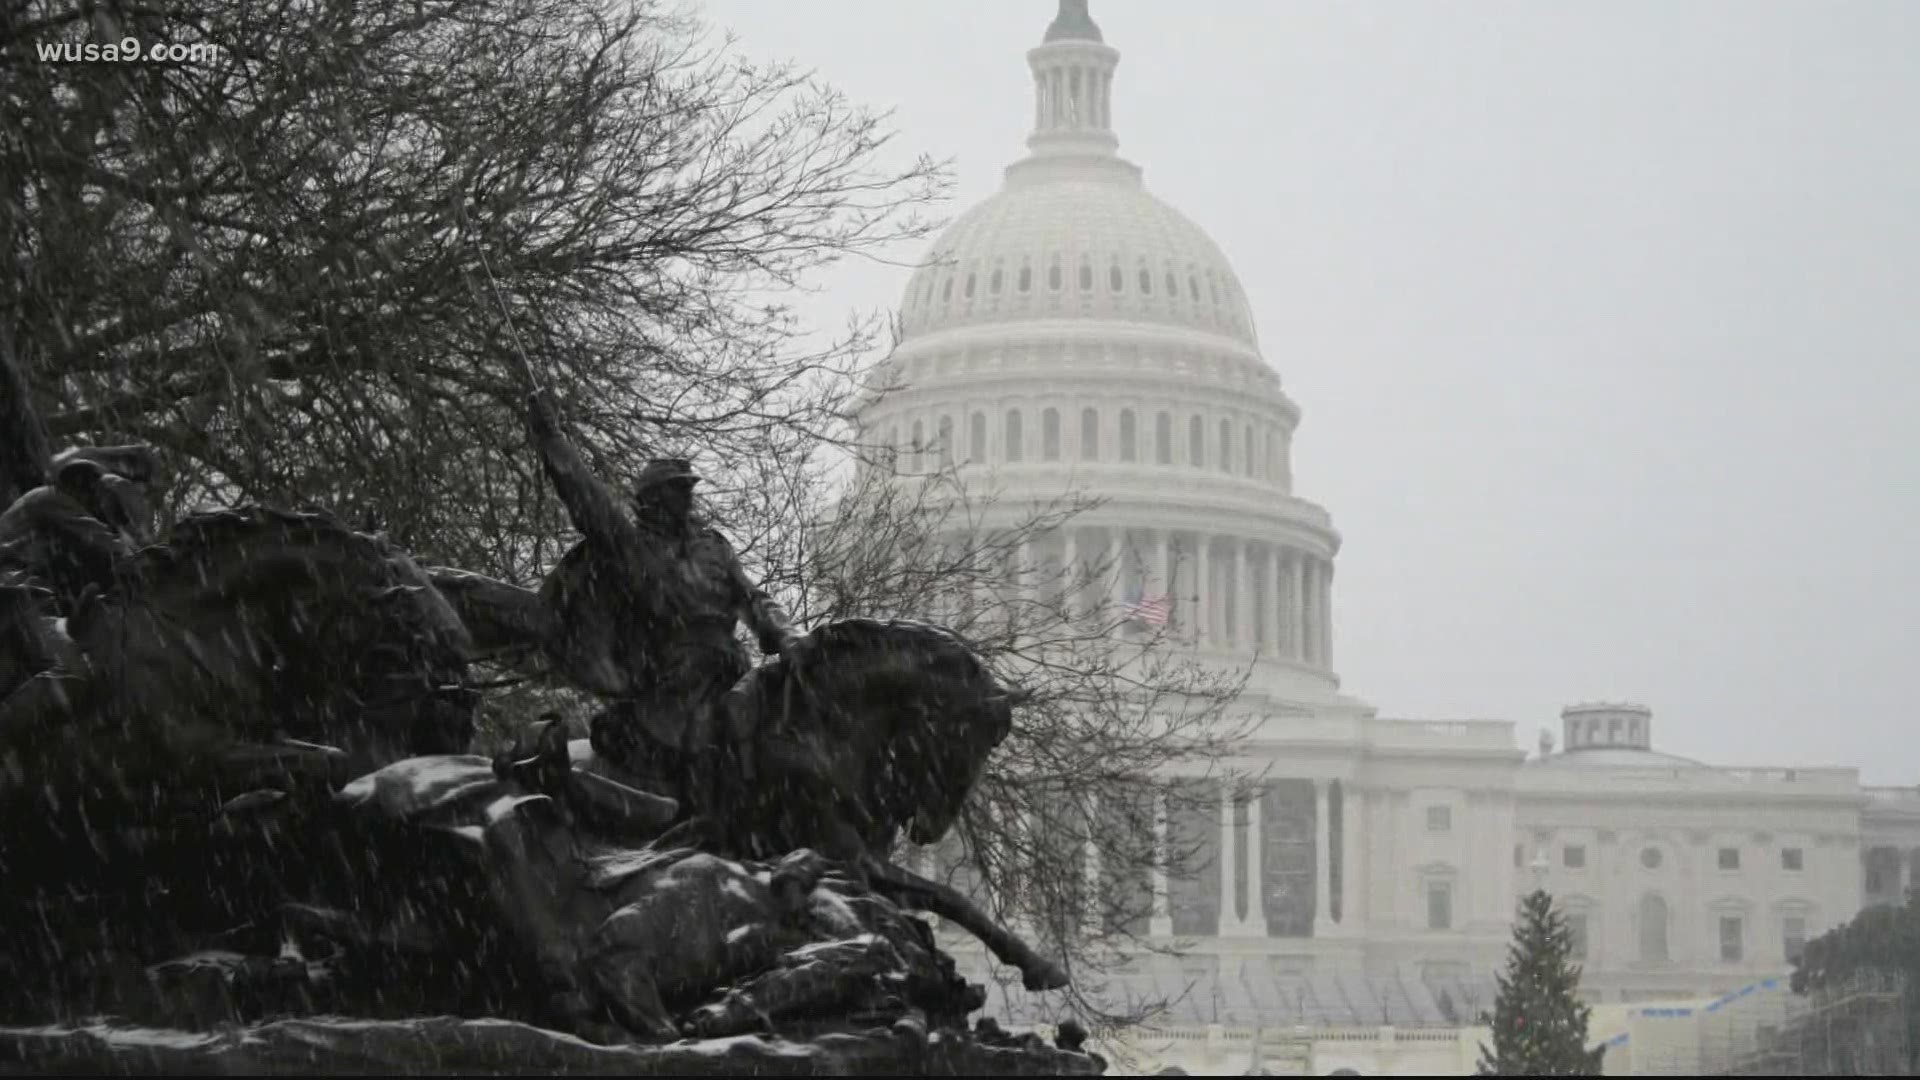 Icy conditions can impact lawmakers after snow moves through the Nation's Capital. WUSA9's Mike Valerio gives an inside look into what things look like.